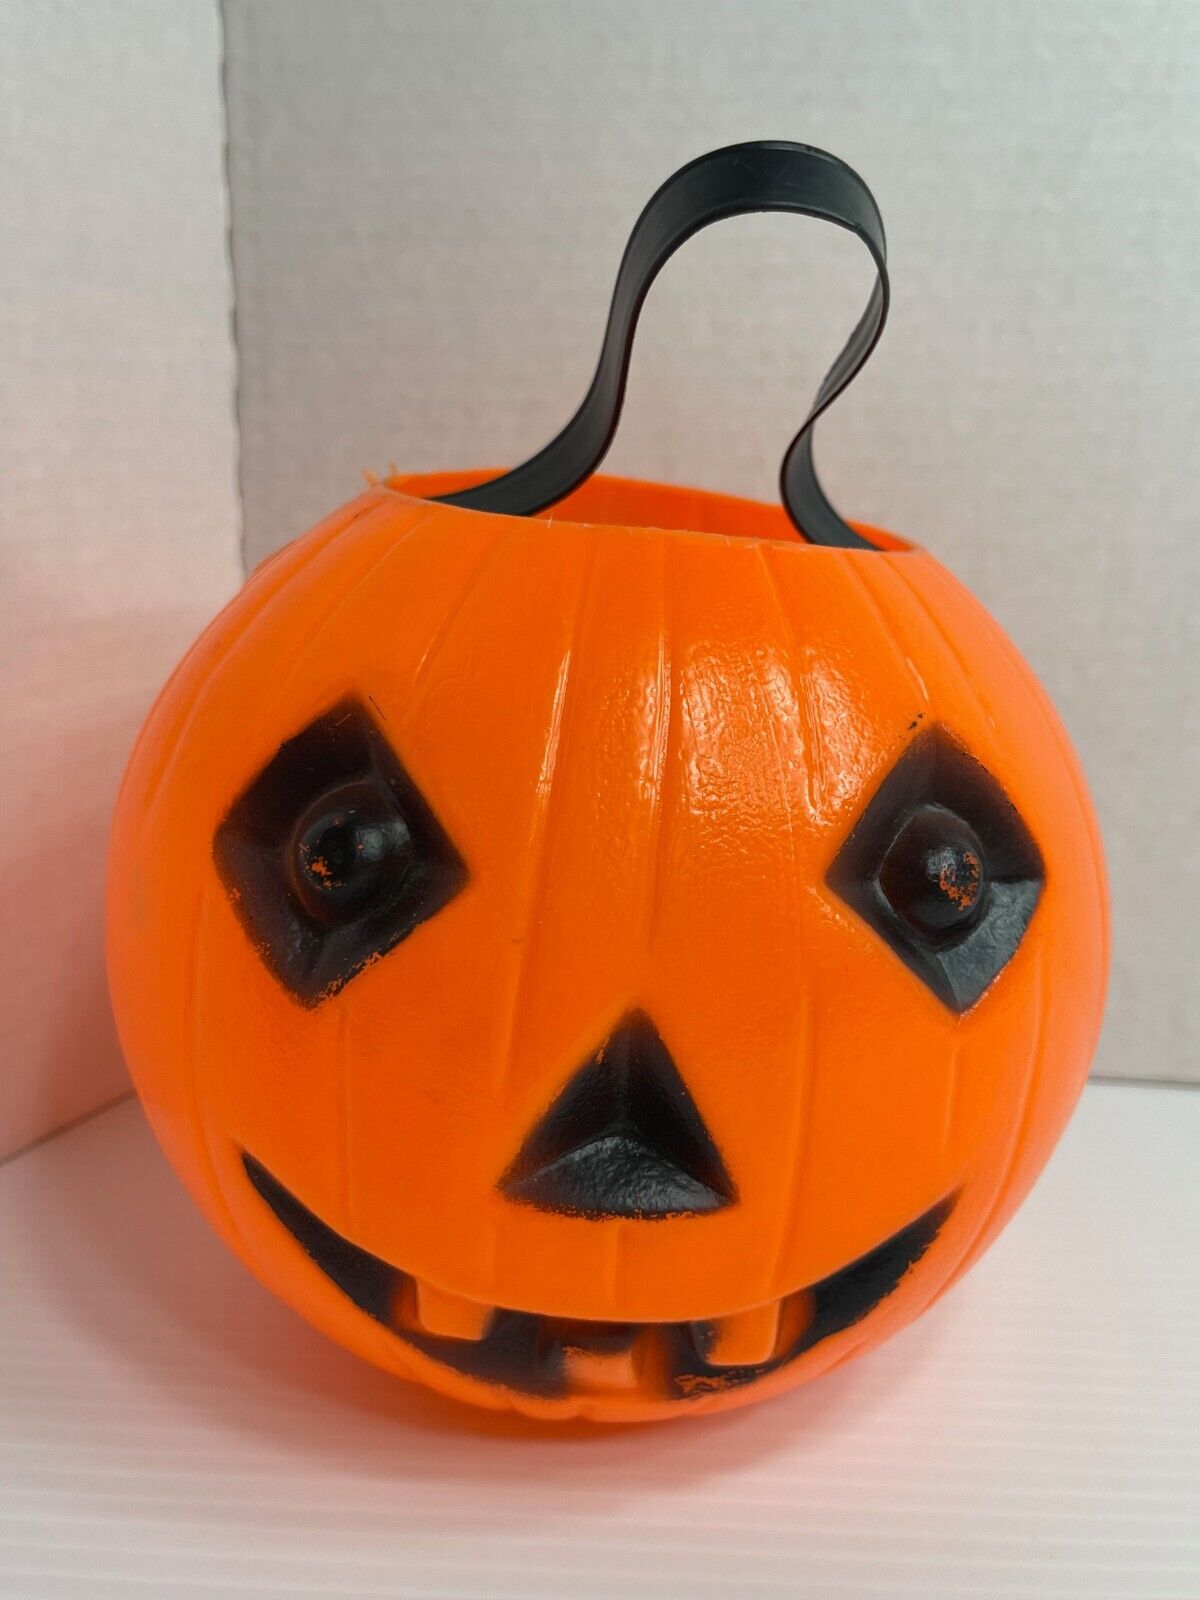 Vintage 1970s - Small Jack O Lantern Pumpkin Trick or Treat Pail With Handle